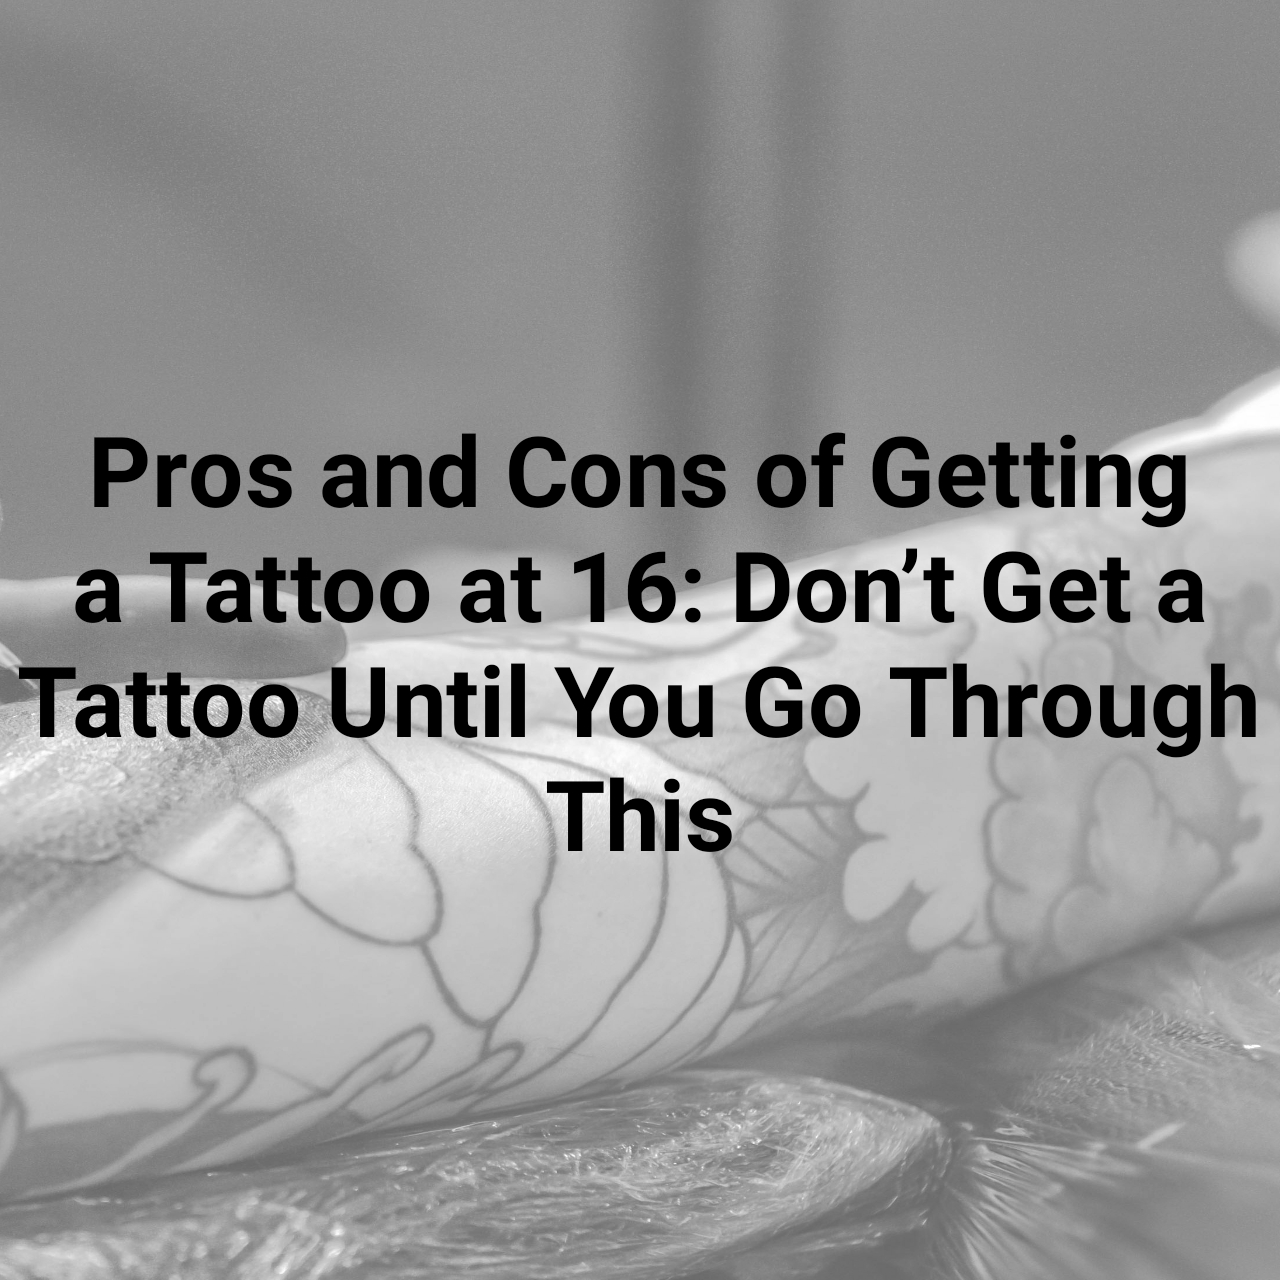 Pros and cons of getting a tattoo